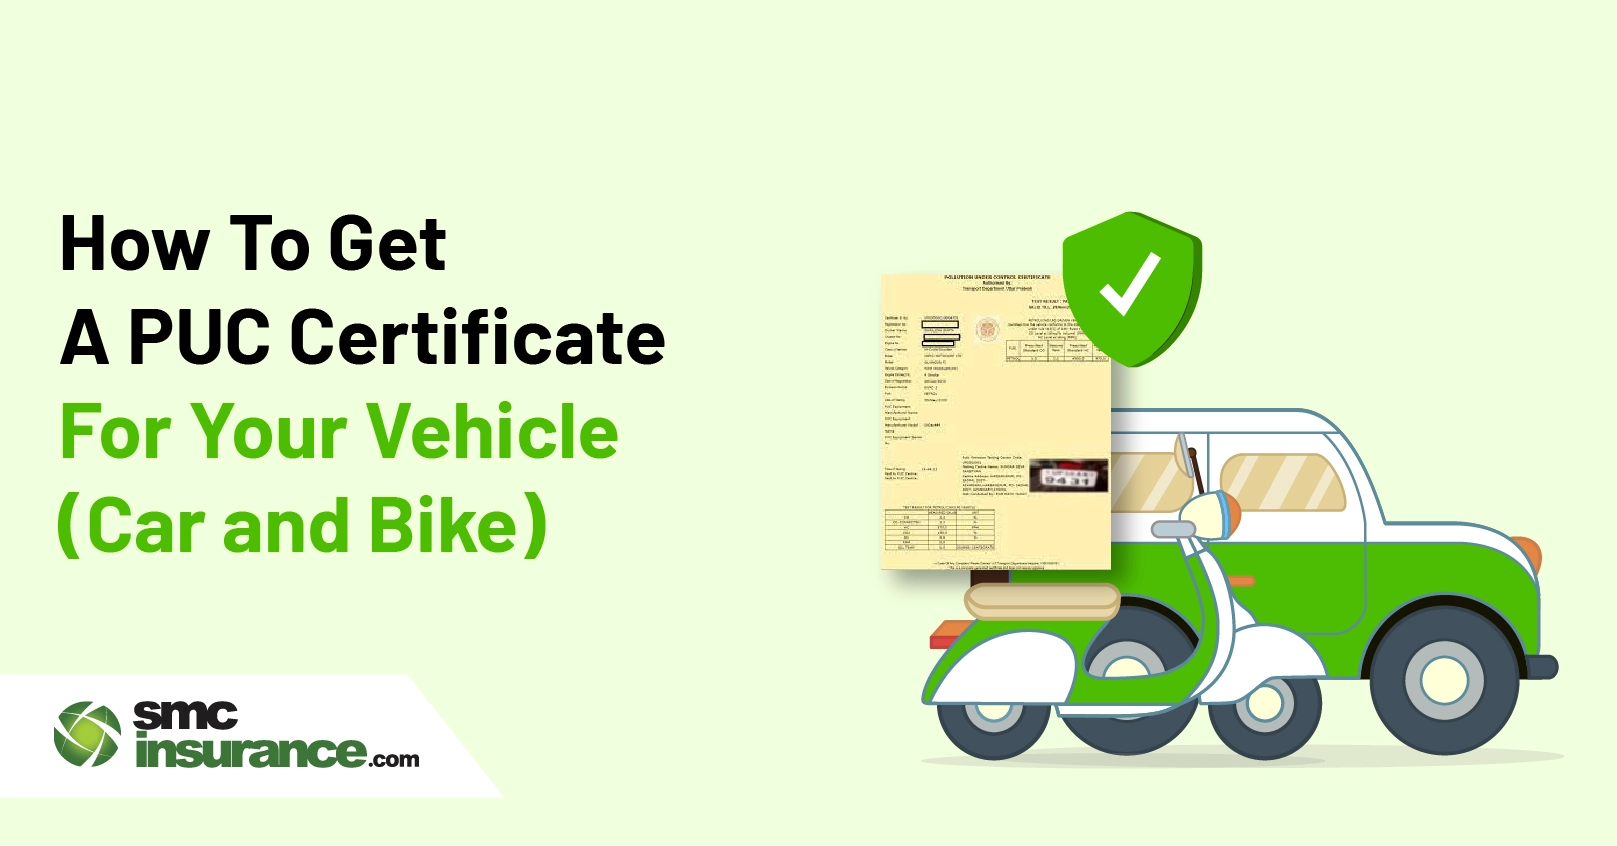 How To Get A PUC Certificate For Your Vehicle (Car And Bike)?